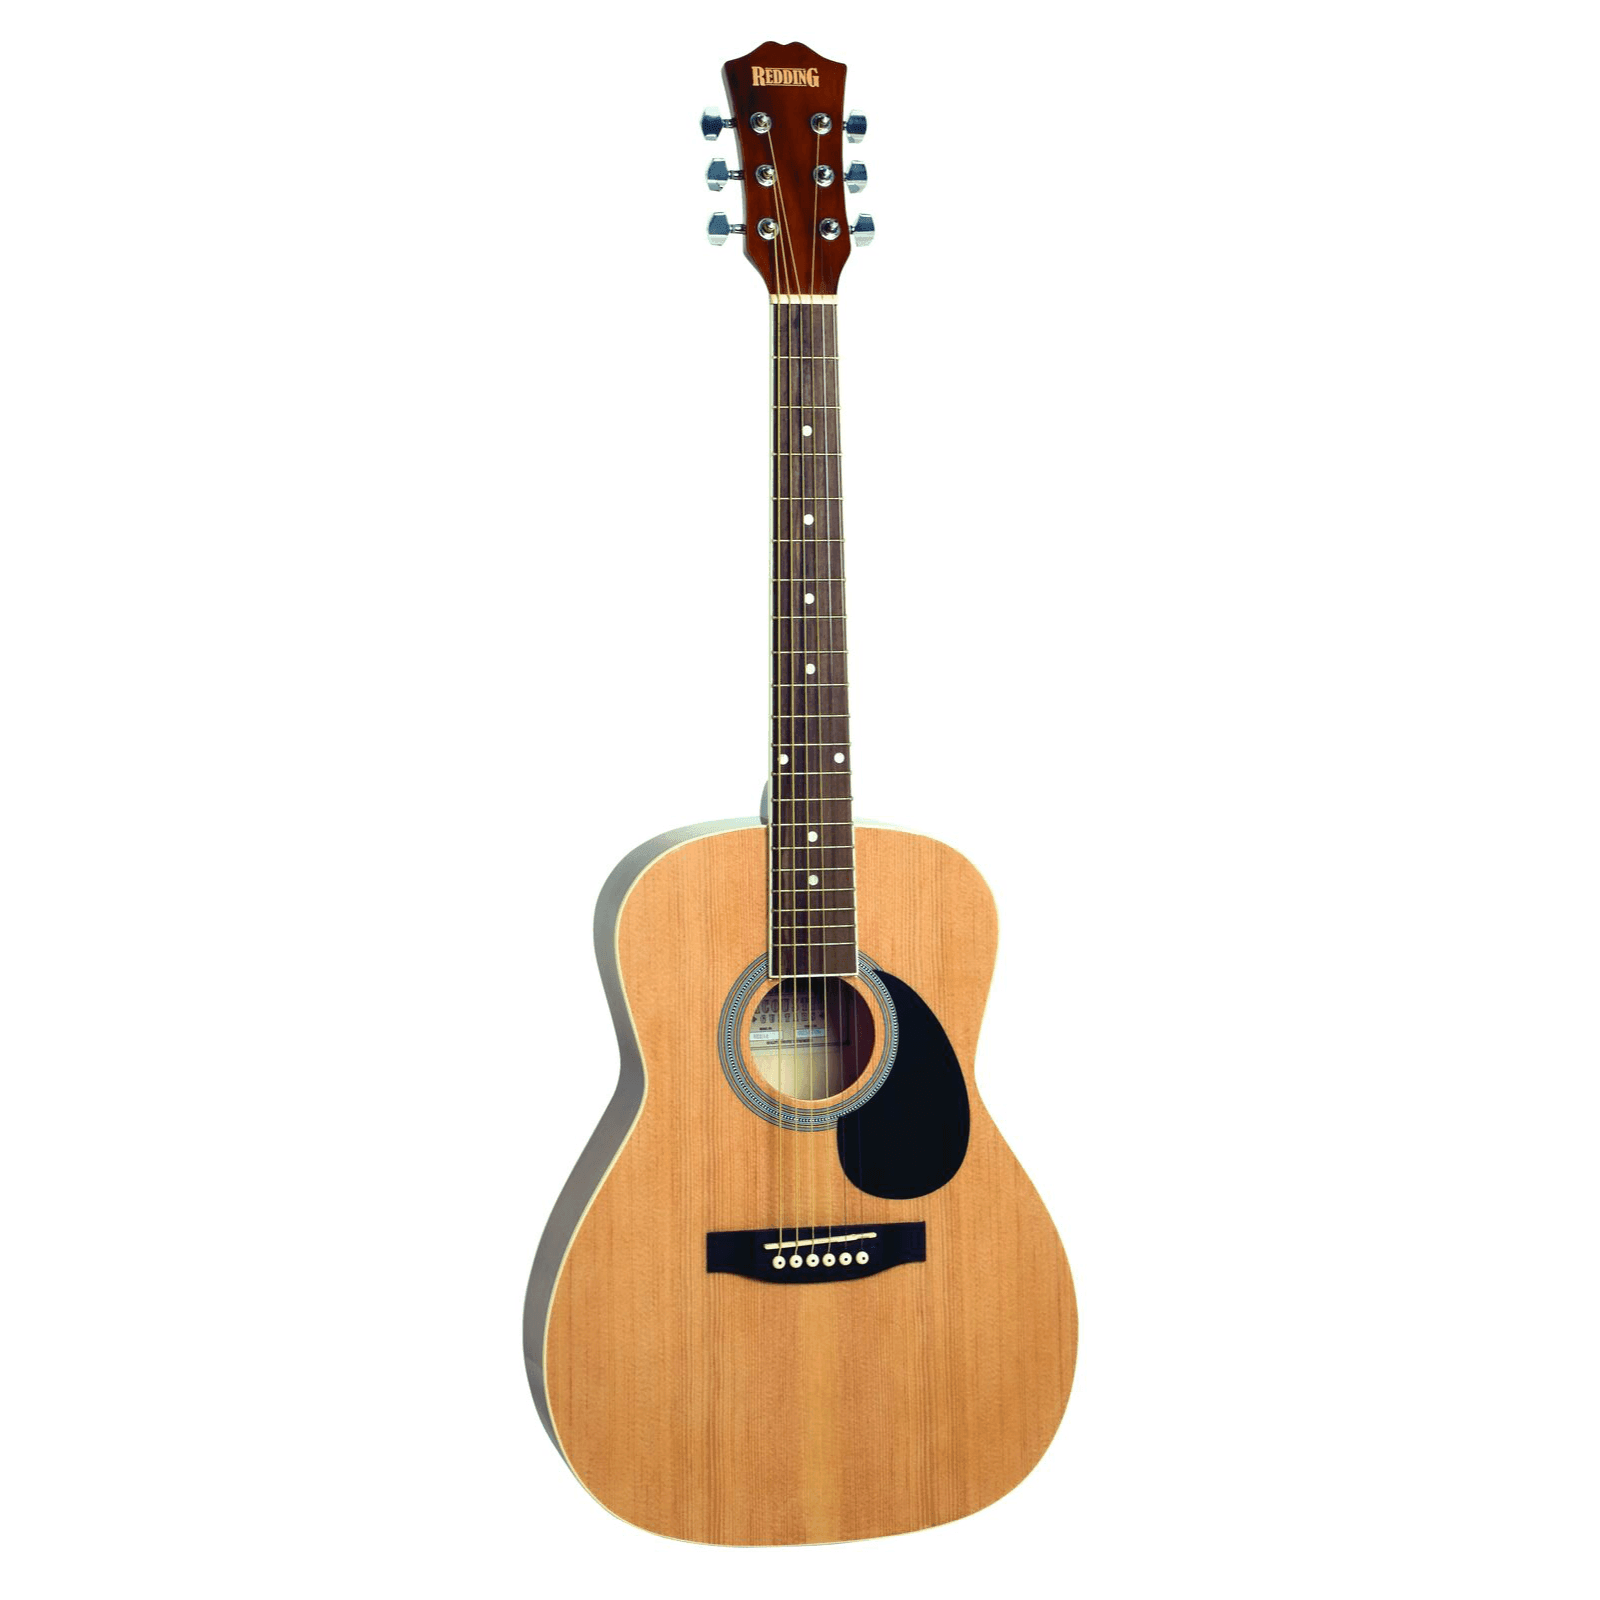 3/4 Acoustic Guitar Natural - Guitars - Acoustic by Redding at Muso's Stuff